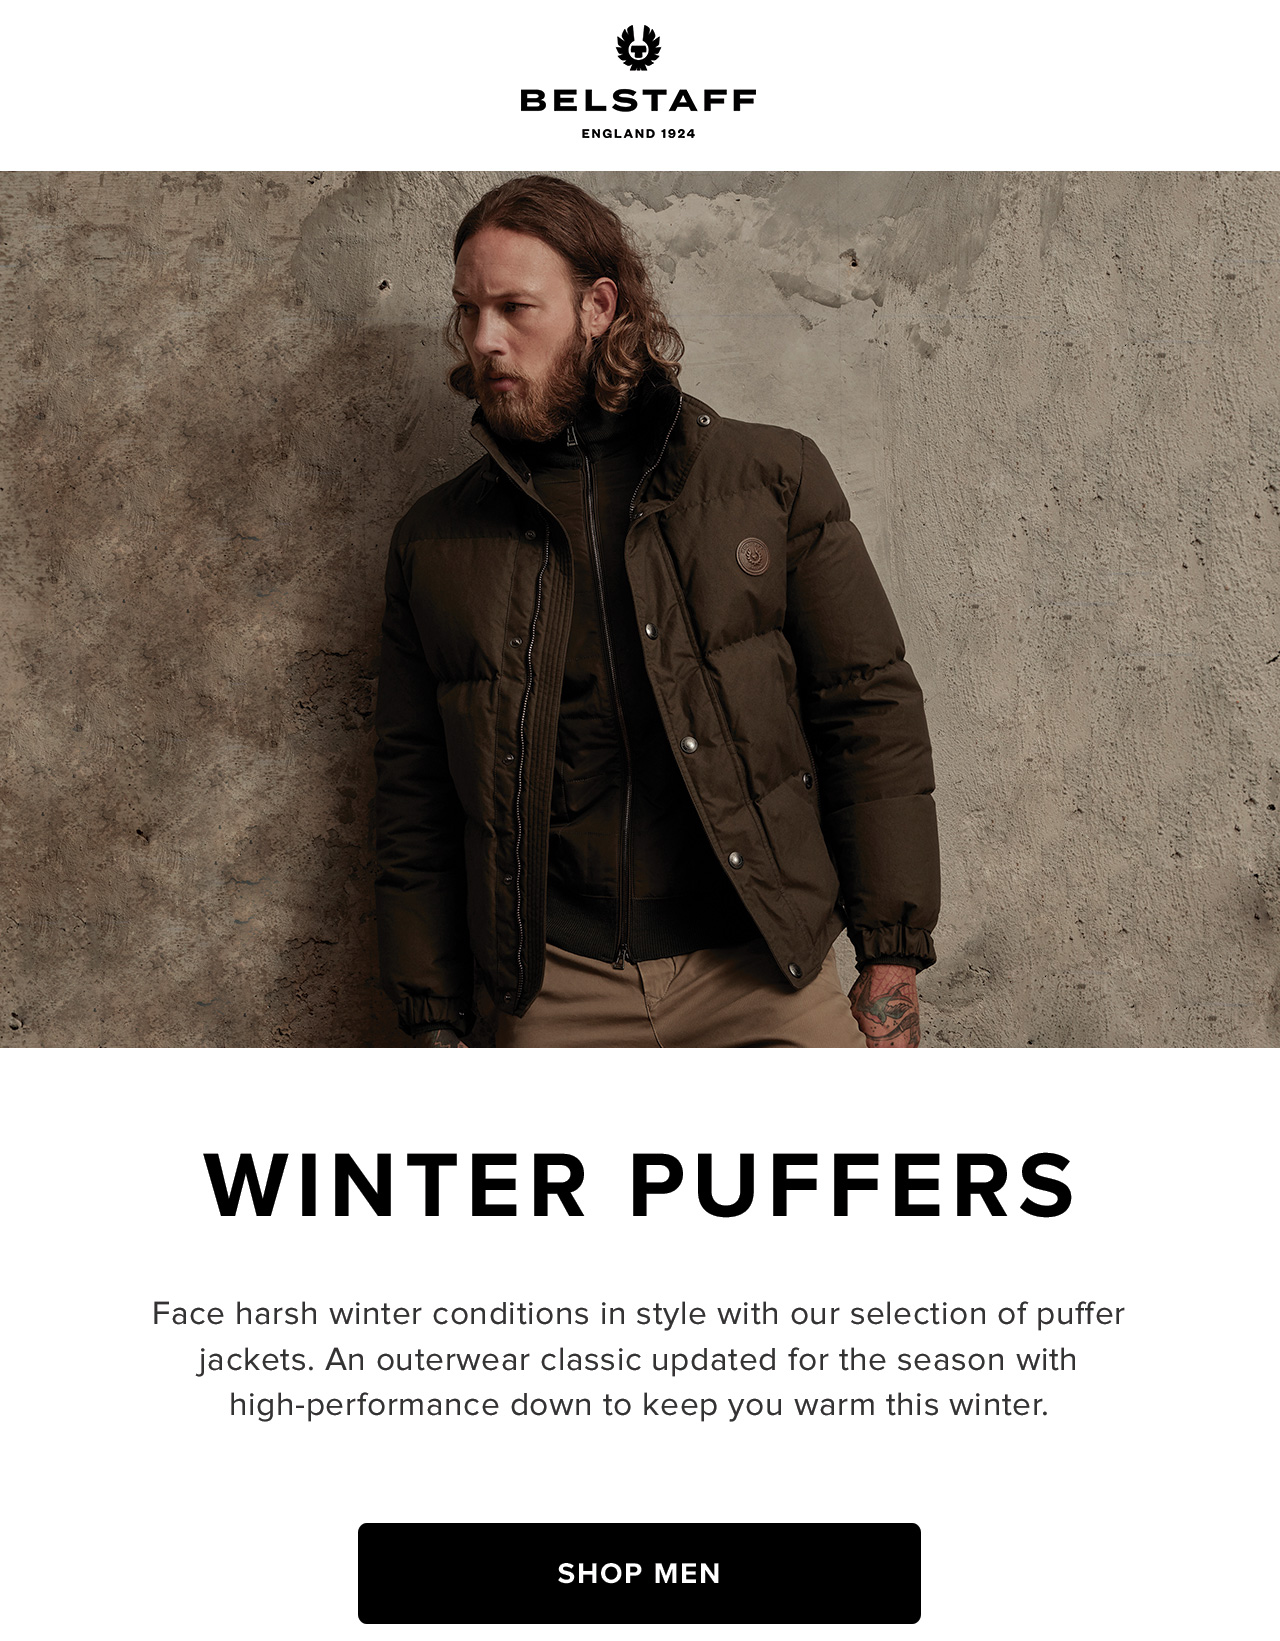 Face harsh winter conditions in style with our selection of puffer jackets. An outerwear classic updated for the season with high-performance down to keep you warm this winter.